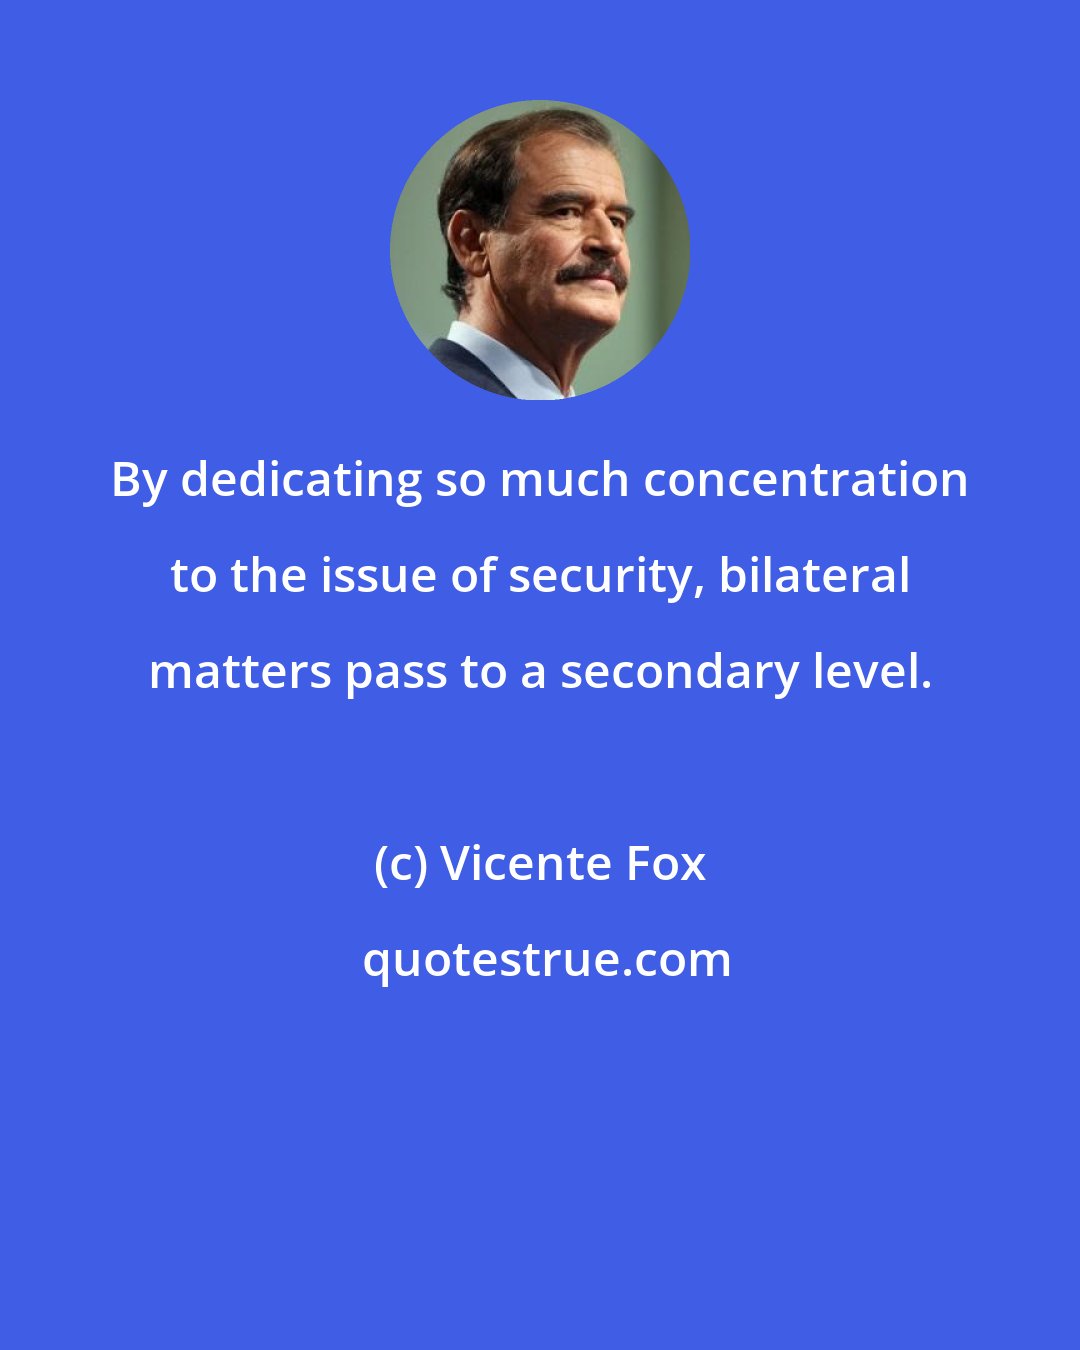 Vicente Fox: By dedicating so much concentration to the issue of security, bilateral matters pass to a secondary level.